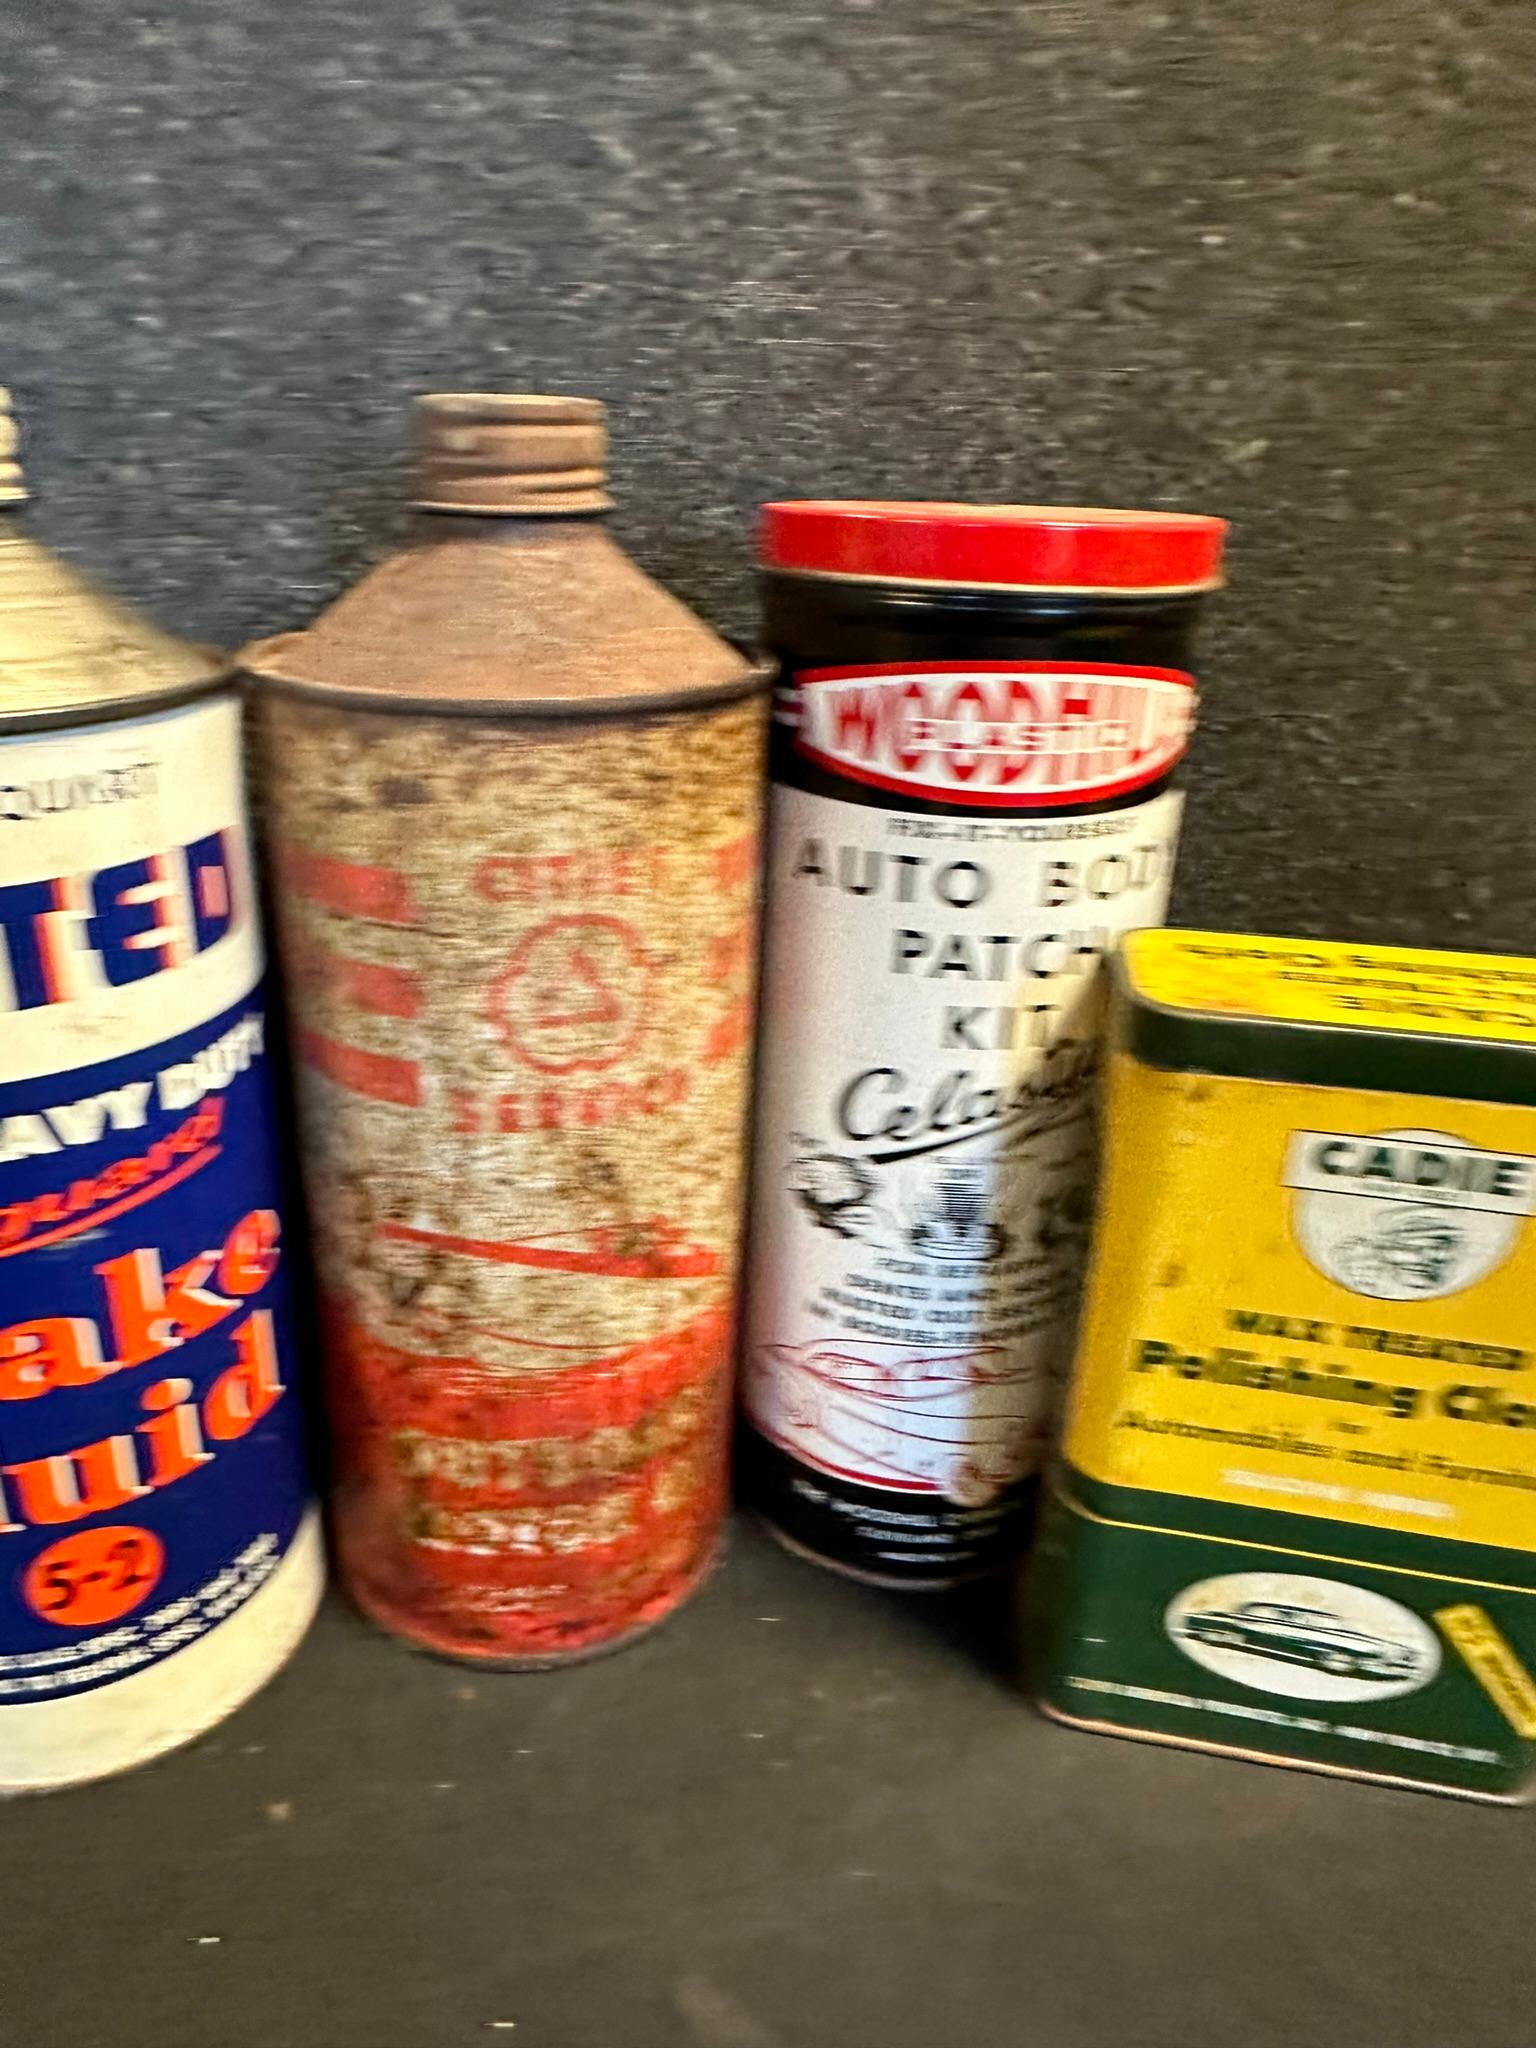 Lot of 8 Misc Vintage Service Station Cans: Eagleine, Fiebings, United Brake, Cities Service, Wood H